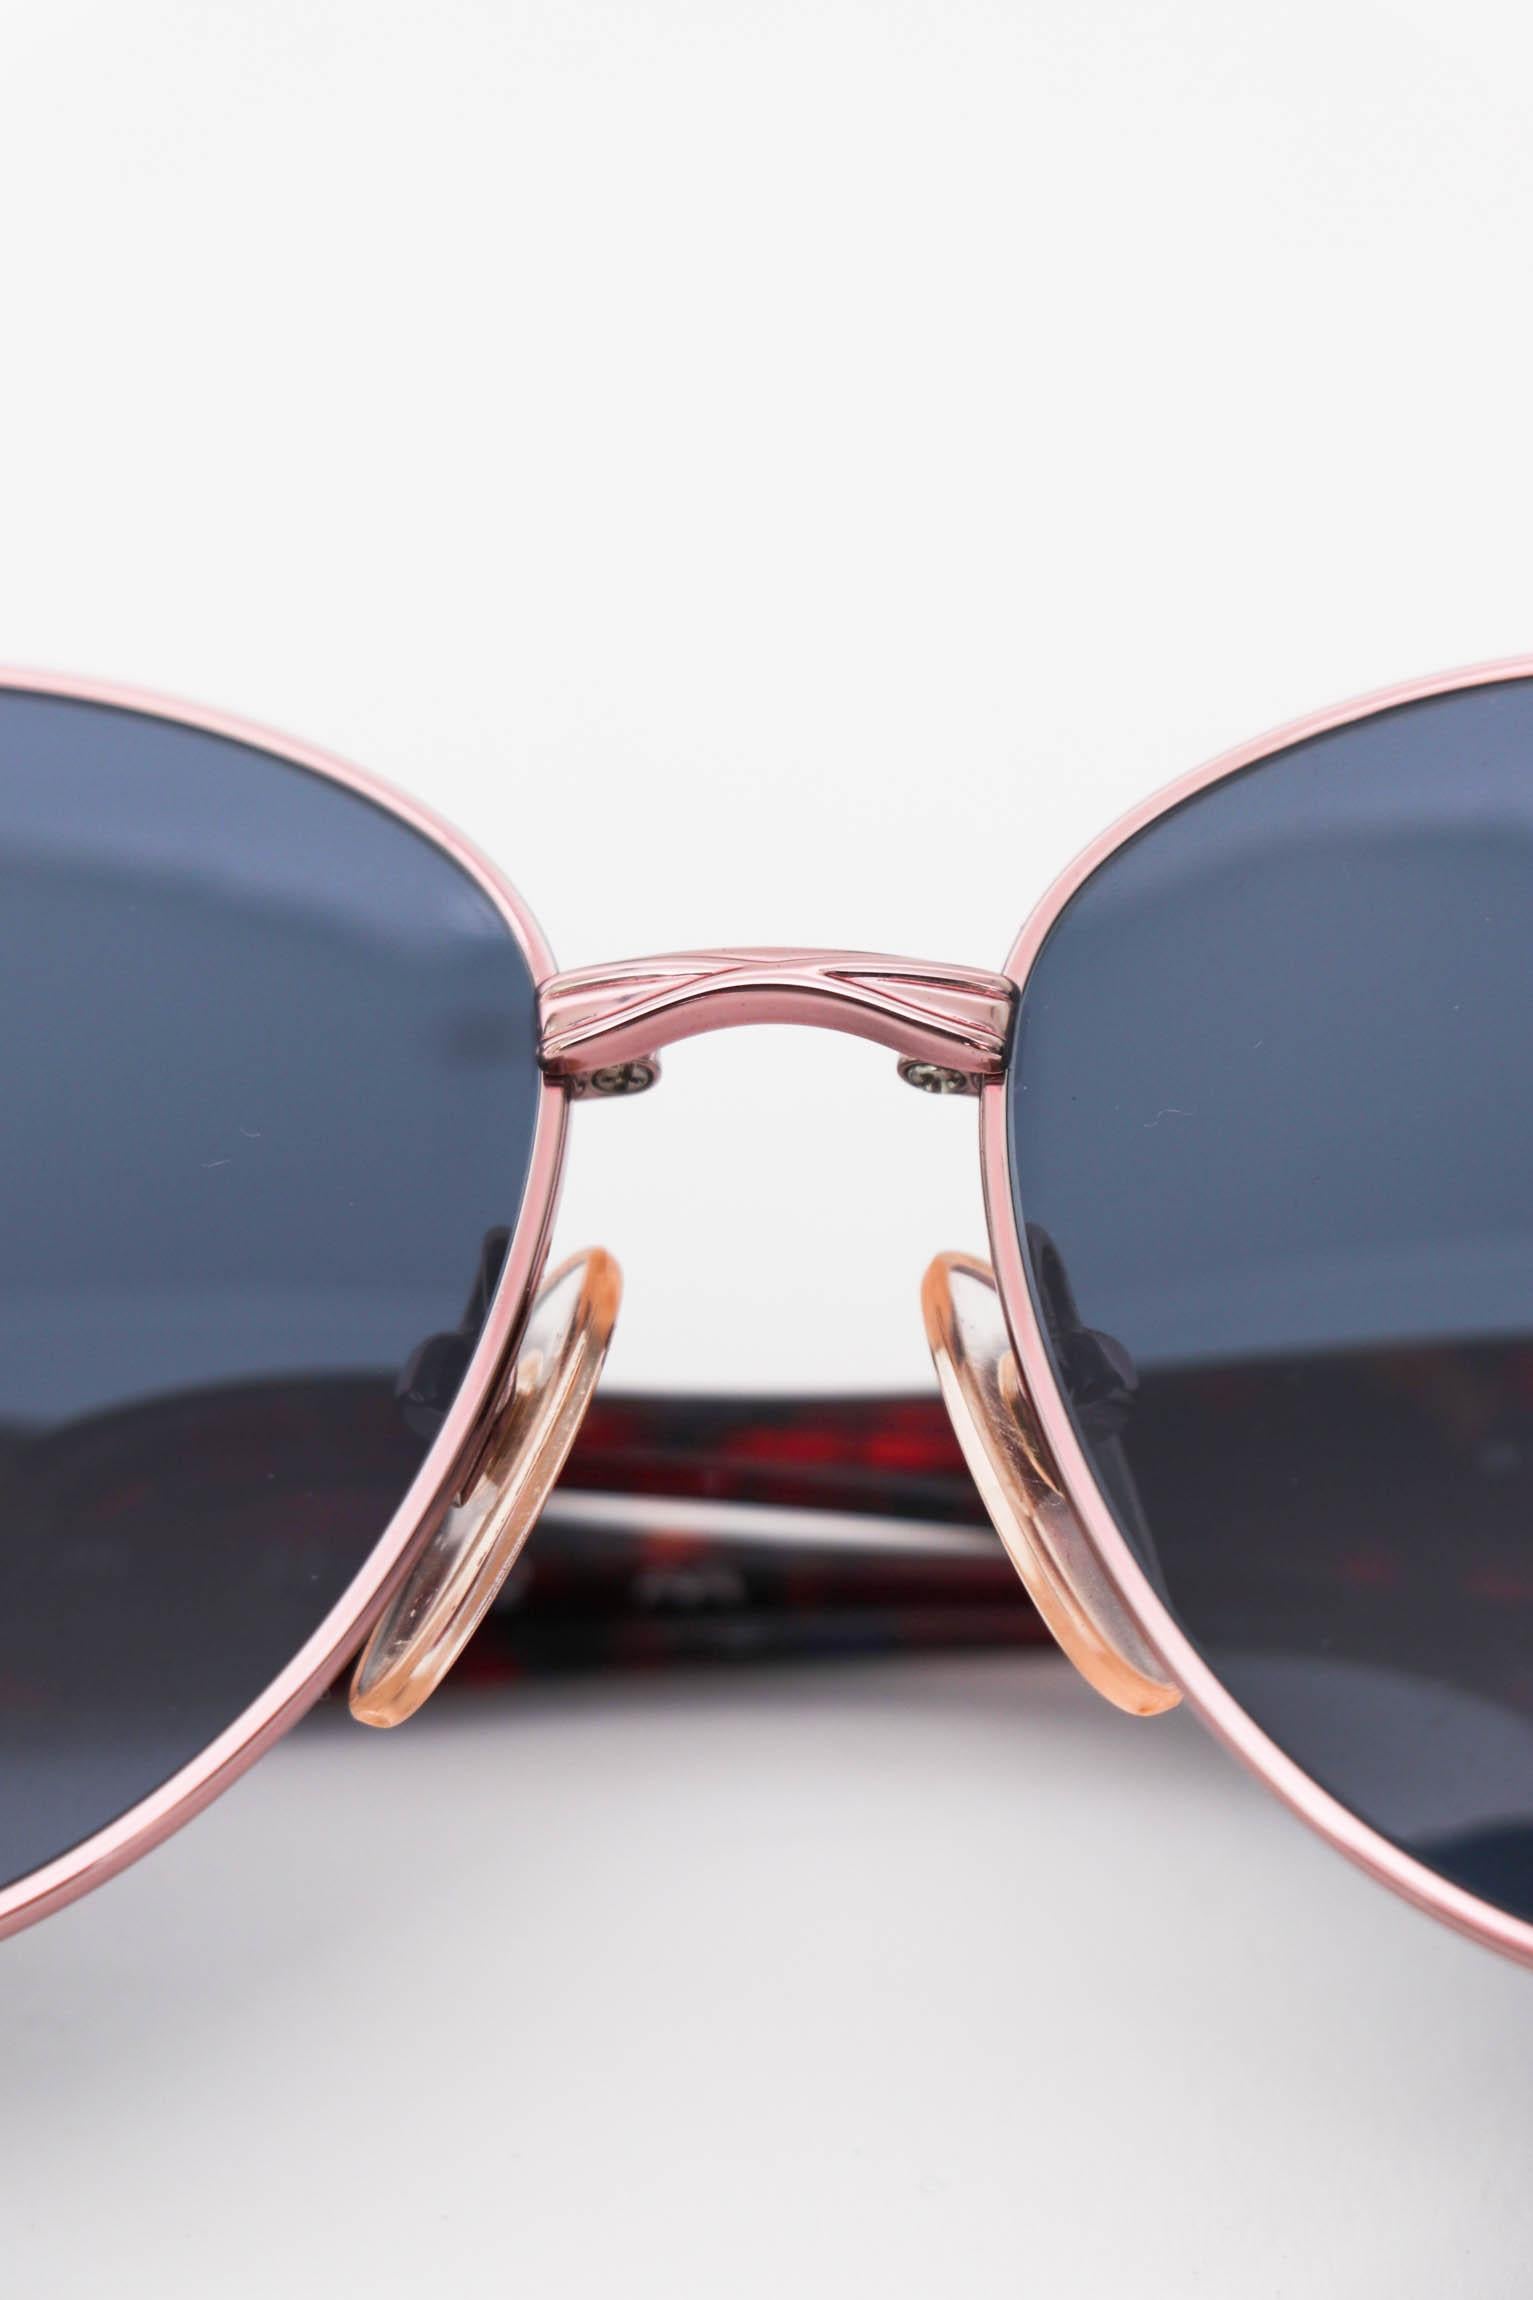 A pair of 1980s Yves Saint Laurent sunglasses with red temples,  blue tinted glasses and gold& silver hardware. The glasses are attached by an ornamental detail that incorporates the YSL logo. 

The sunglasses have the following measurements:
Temple